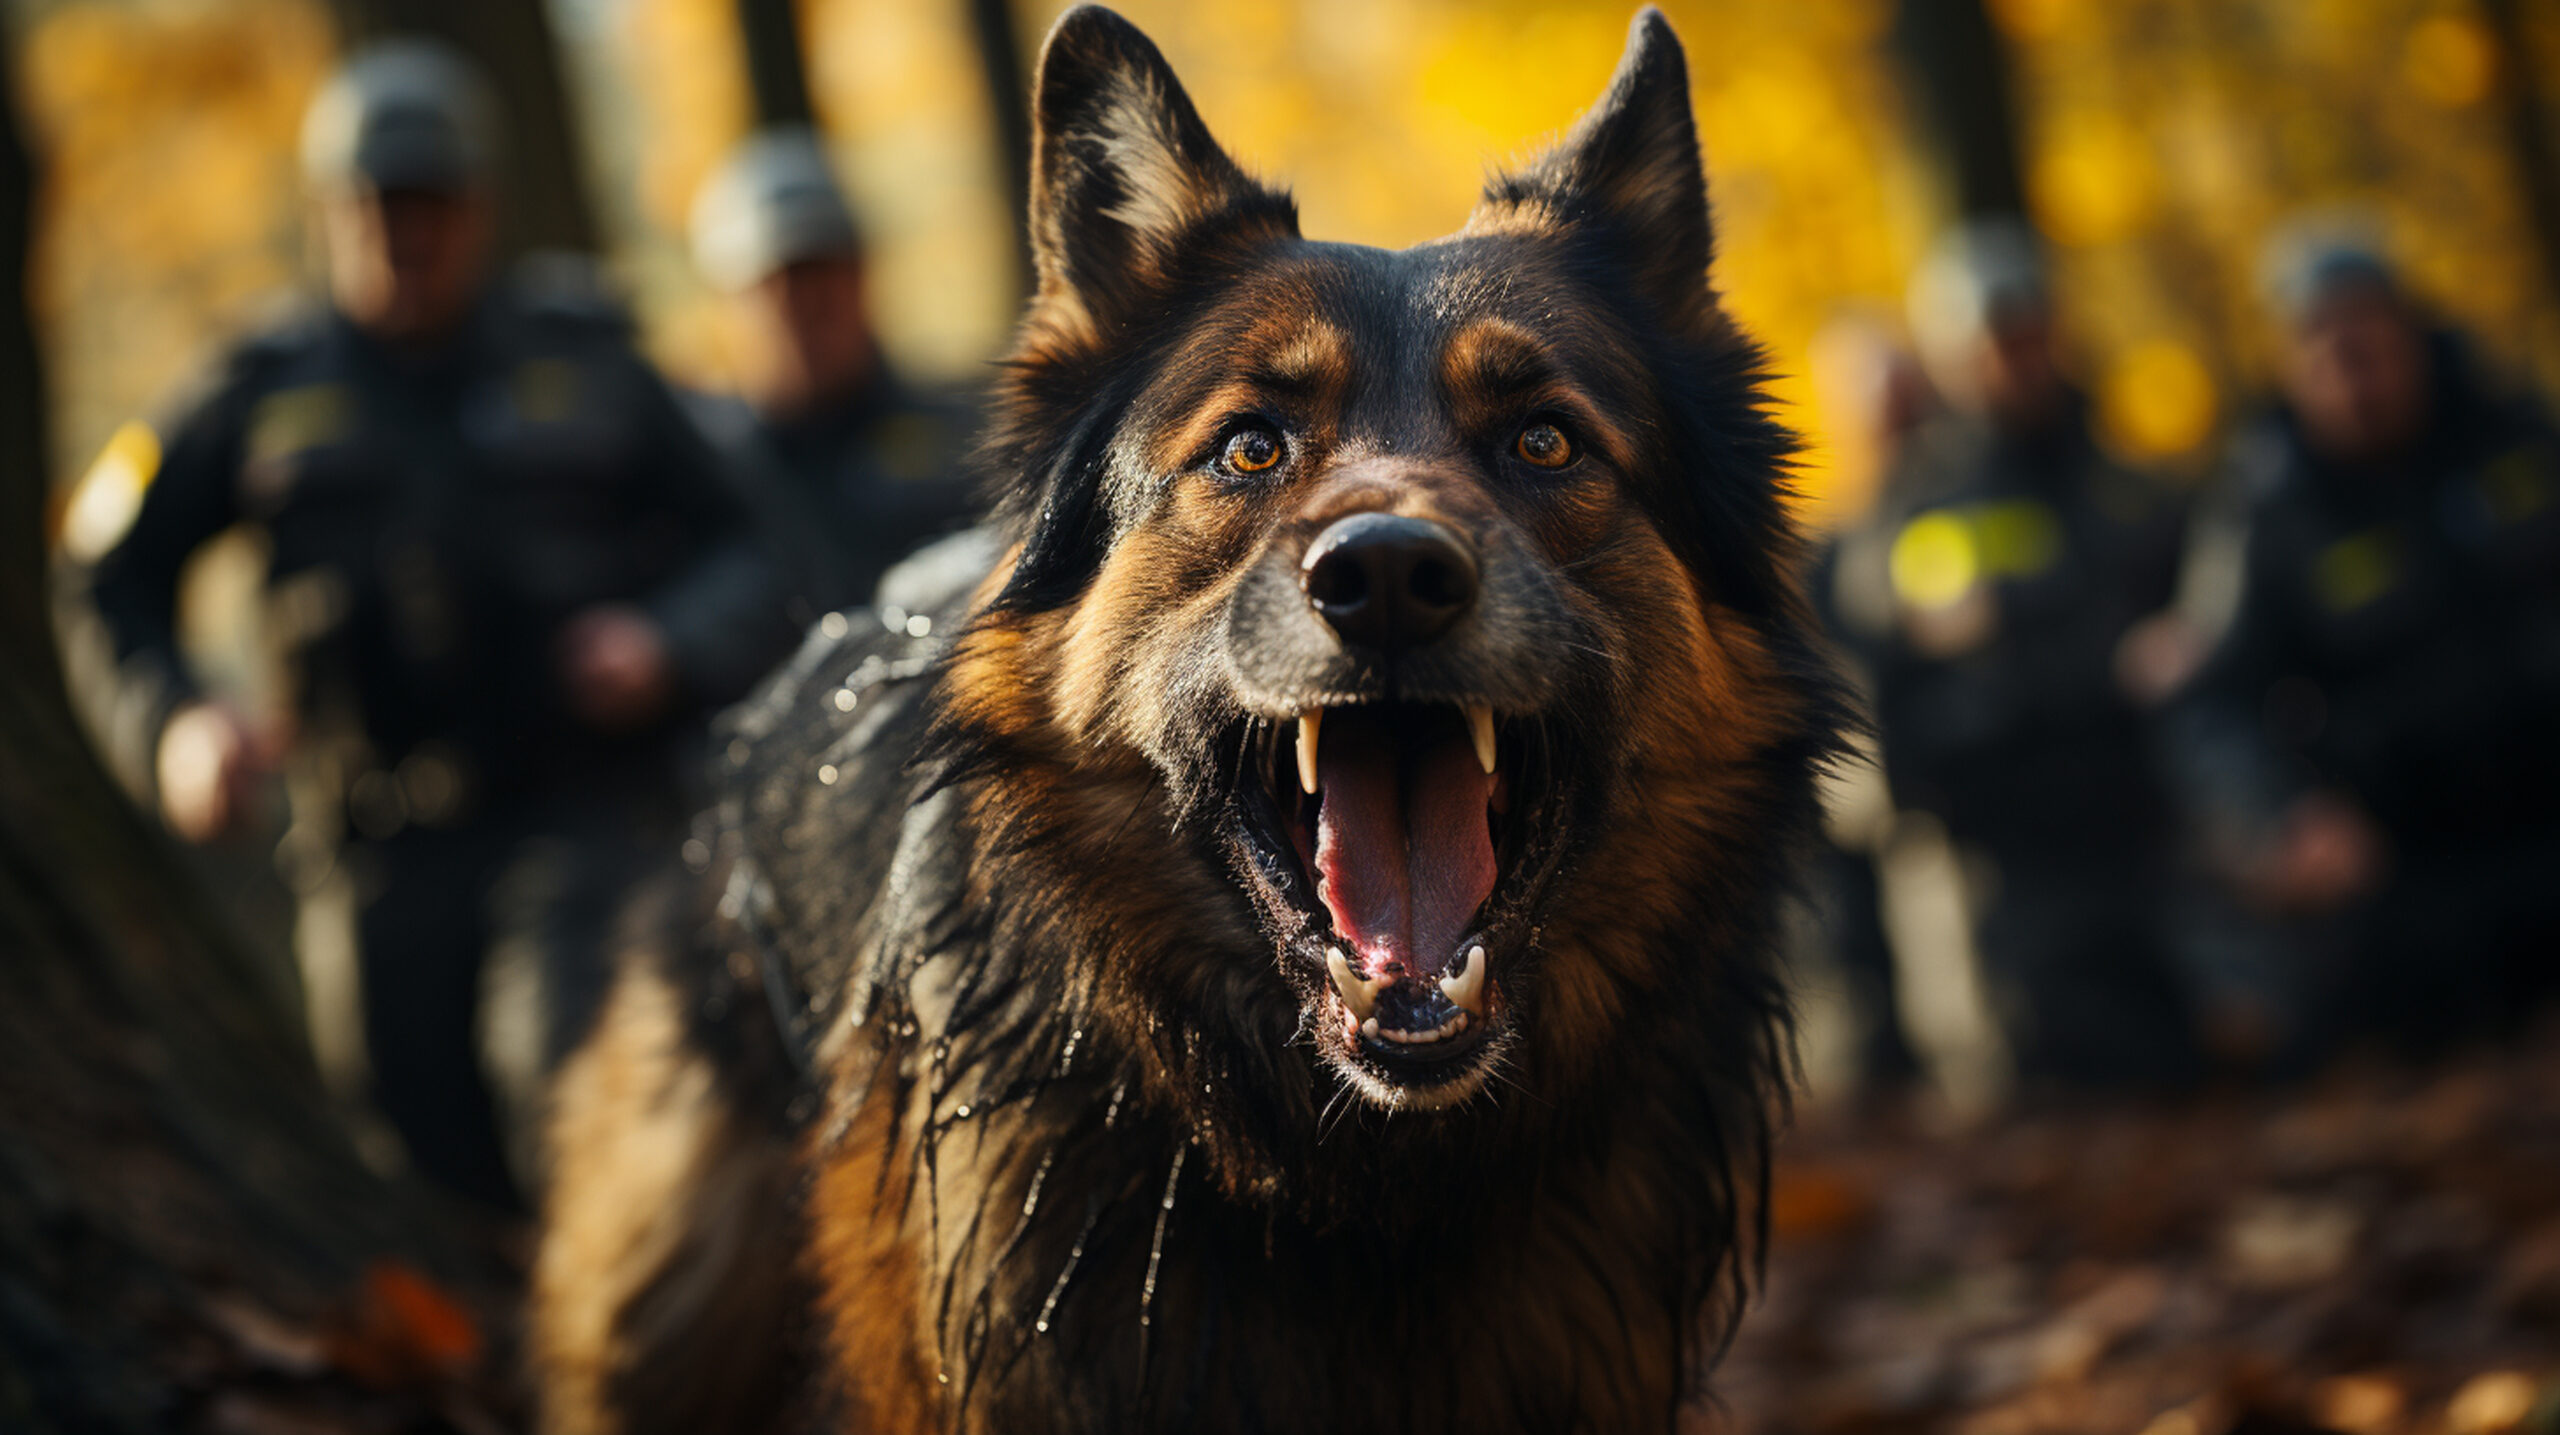 German shepherds are the most common breed of dog used in law enforcement, military, and search-and-rescue work because they are intelligent, fearless, loyal, and easily trained.